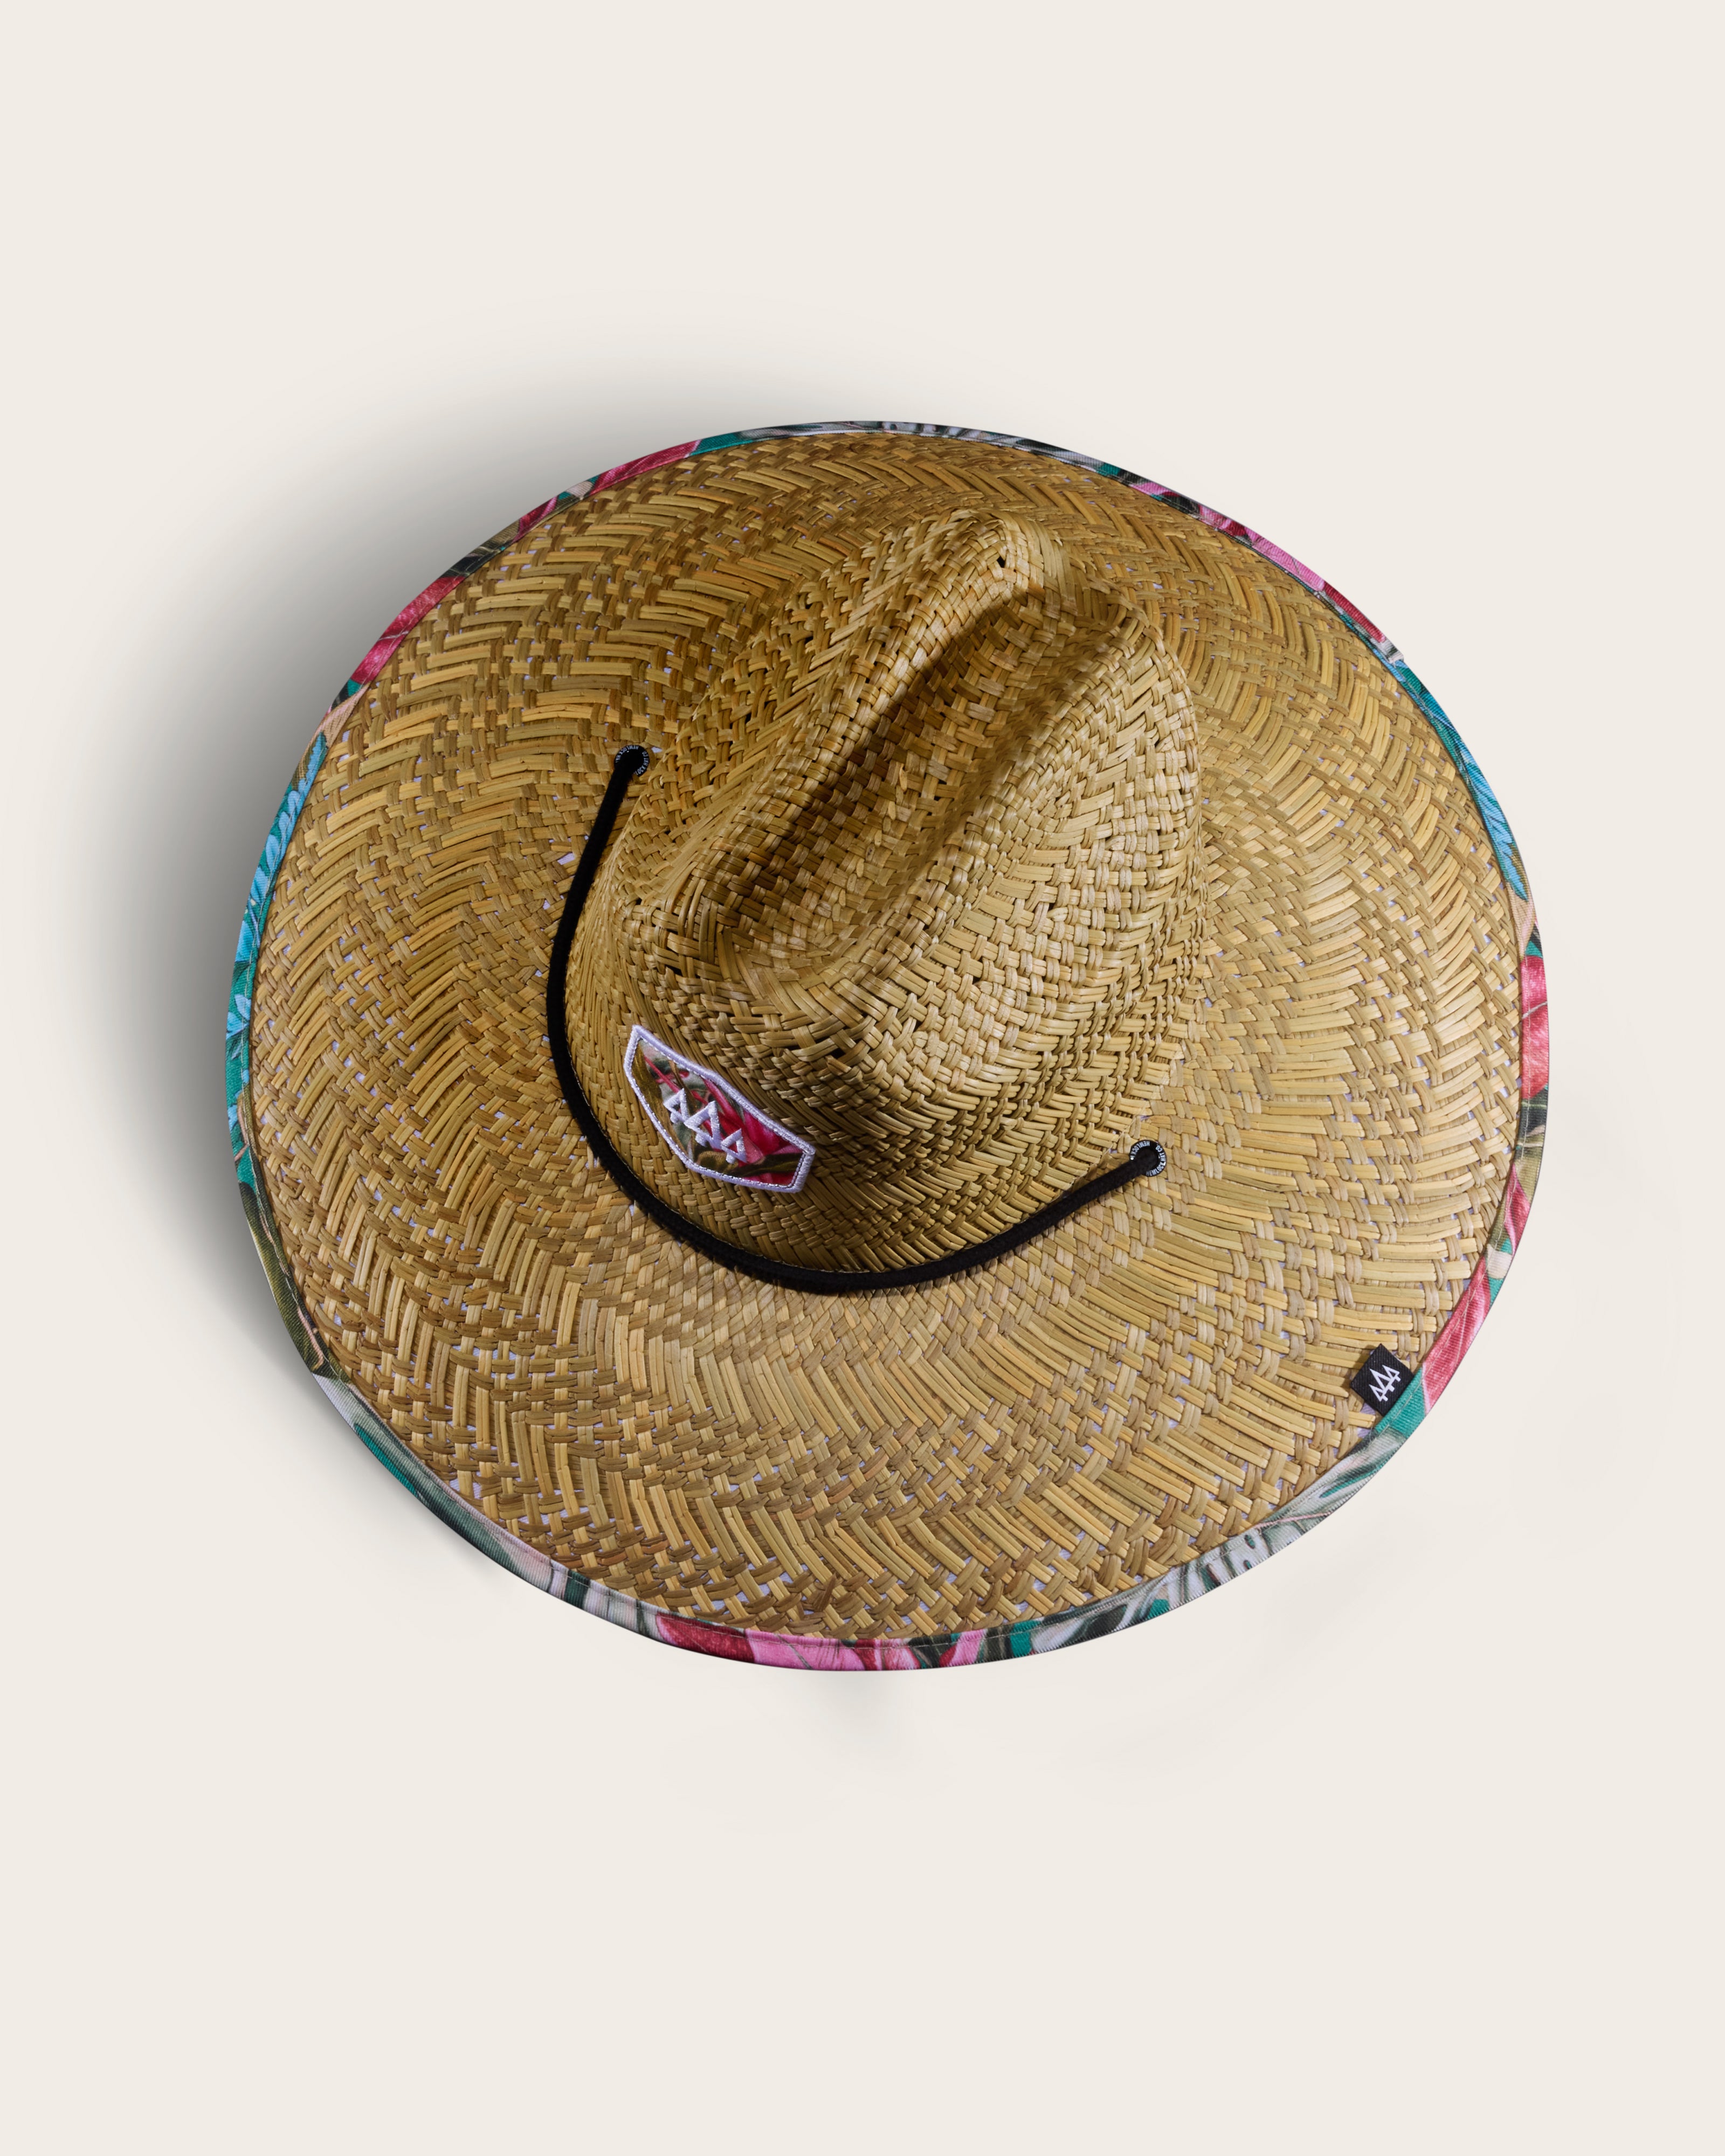 Hemlock Bombay straw lifeguard hat with panther pattern top of hat